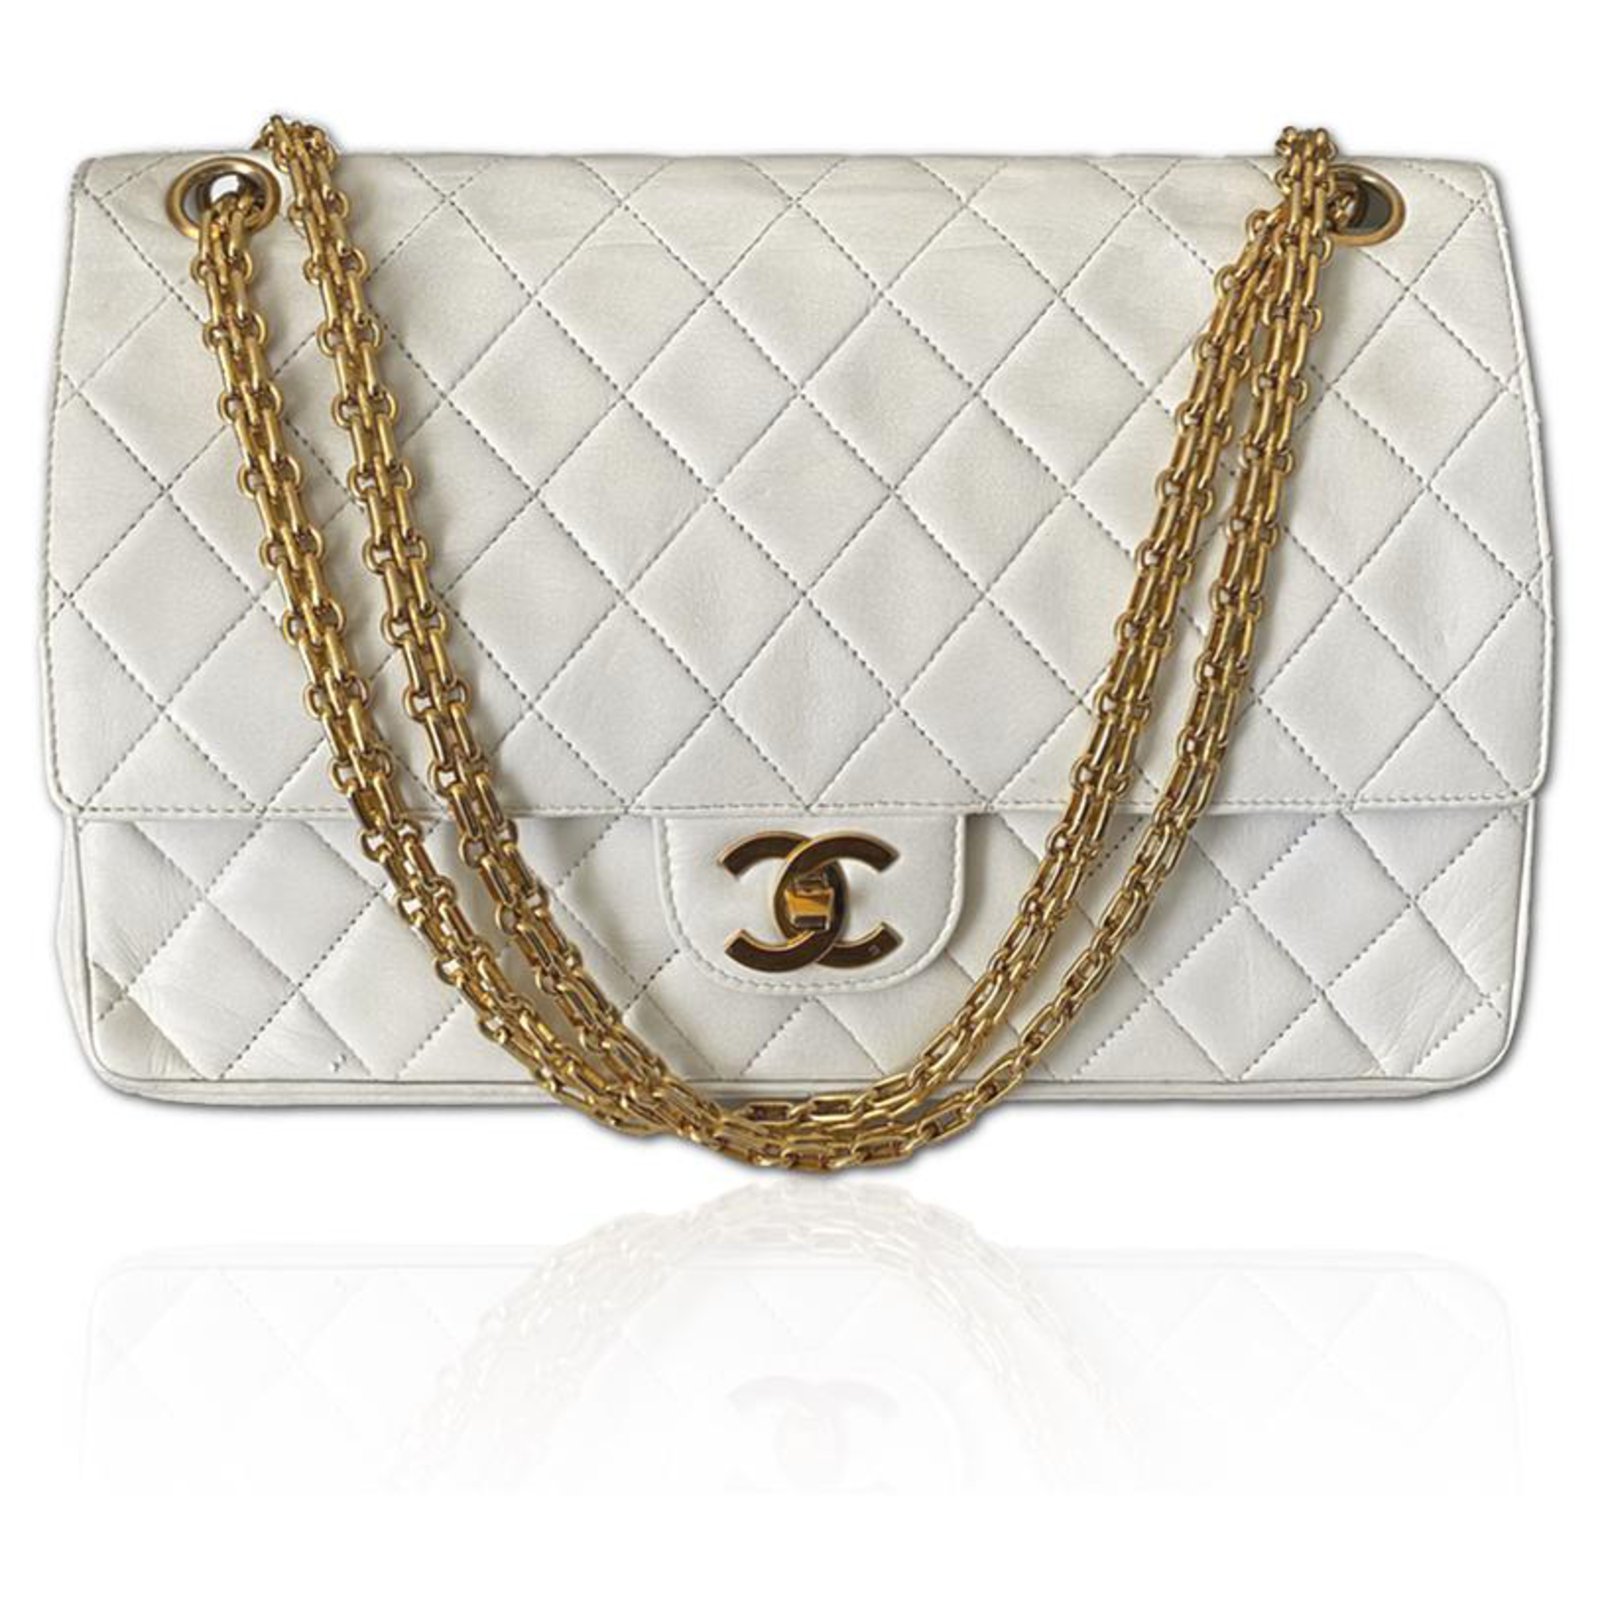 Chanel Mini Timeless flap shoulder bag in ecru quilted lambskin, GHW